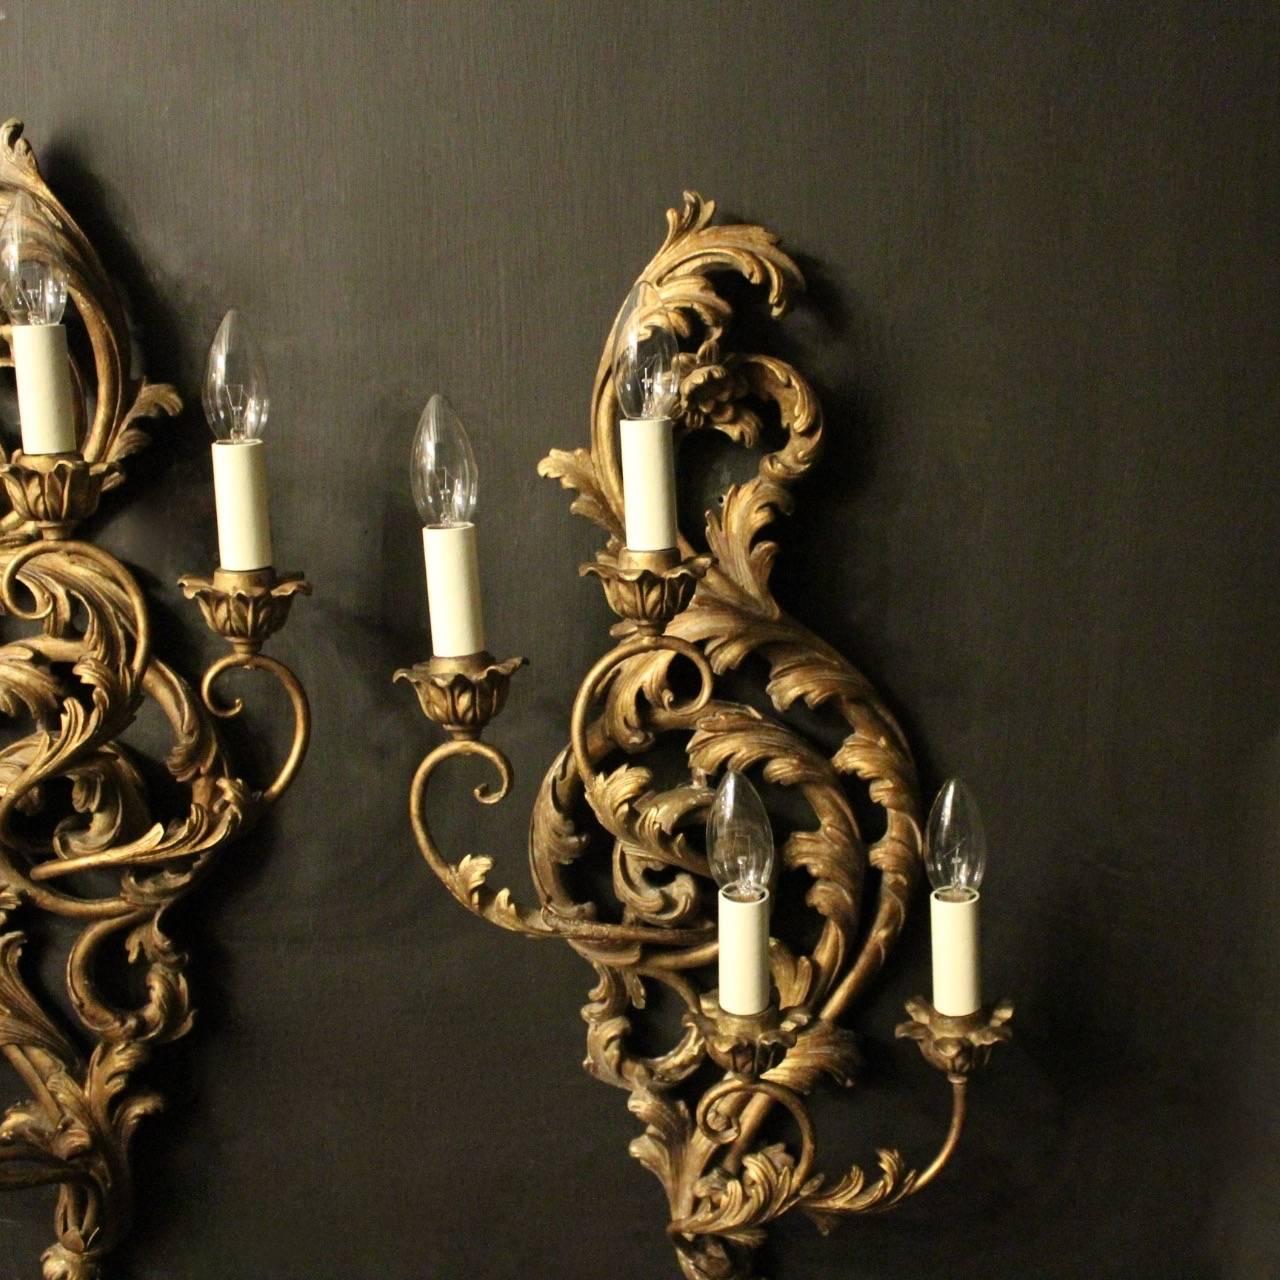 A decorative Italian carved silvered giltwood and toleware opposing four arm antique wall lights, the double tiered foliated toleware leaf scrolling arms with wooden bulbous leaf candle sconces, issuing from an ornate pierced Acanthus leaf silvered